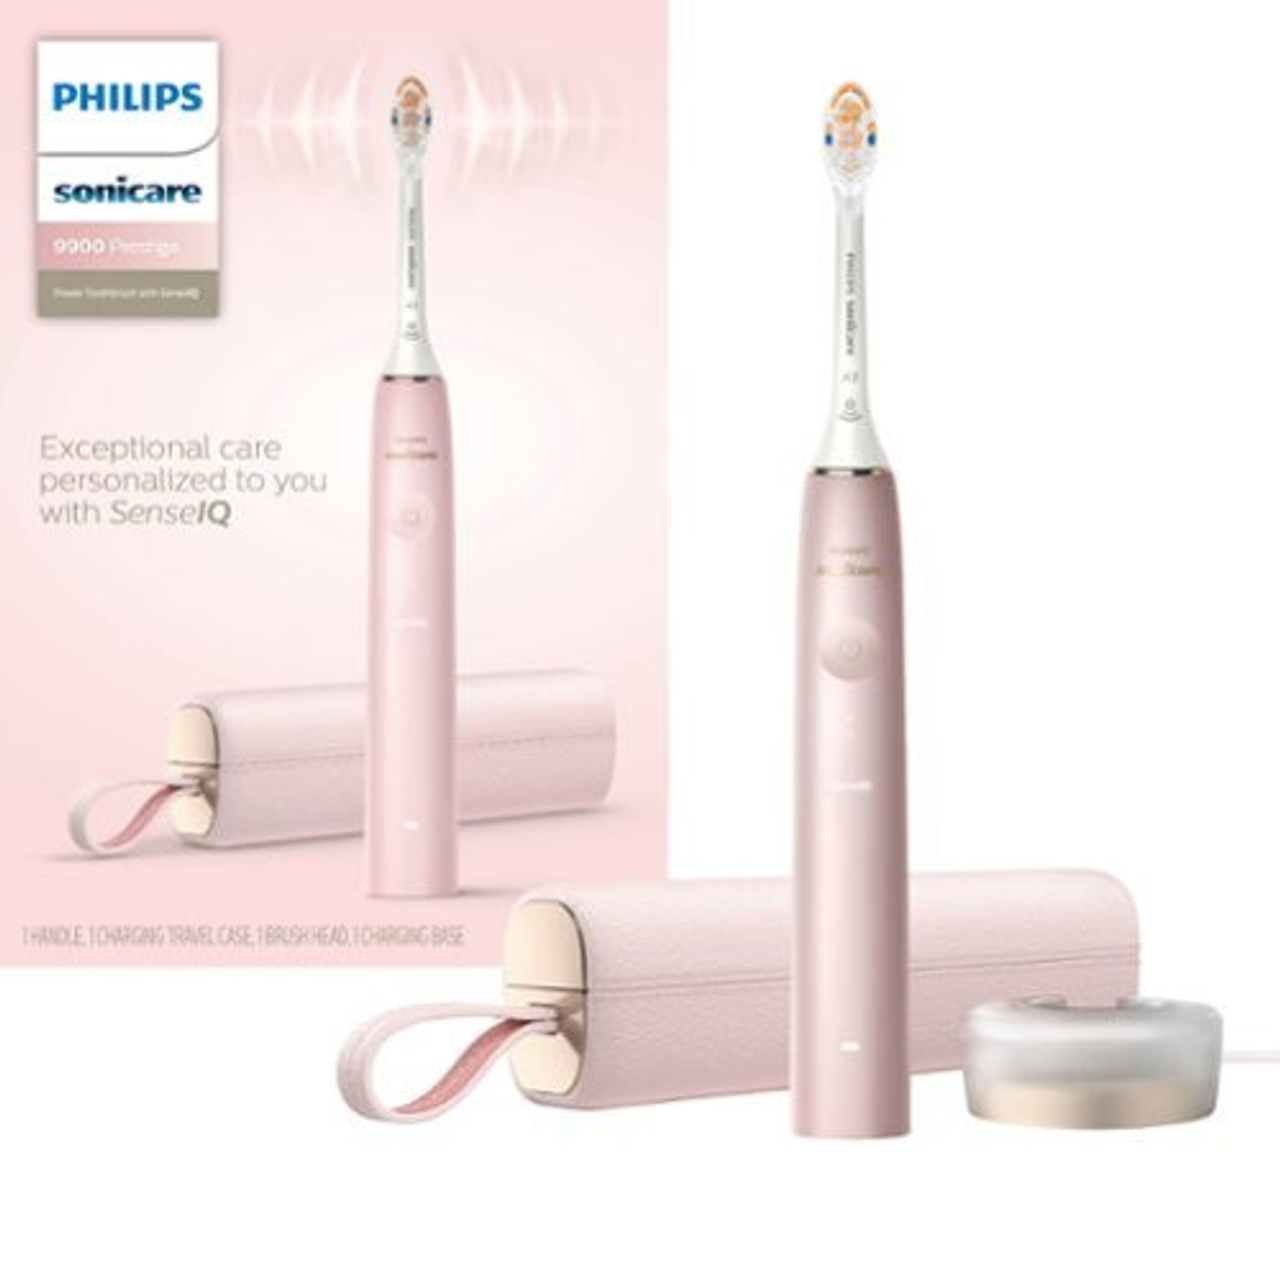 Philips Sonicare 9900 Prestige, Rechargeable Toothbrush with SenseIQ, Pink, HX9990/13 - Pink